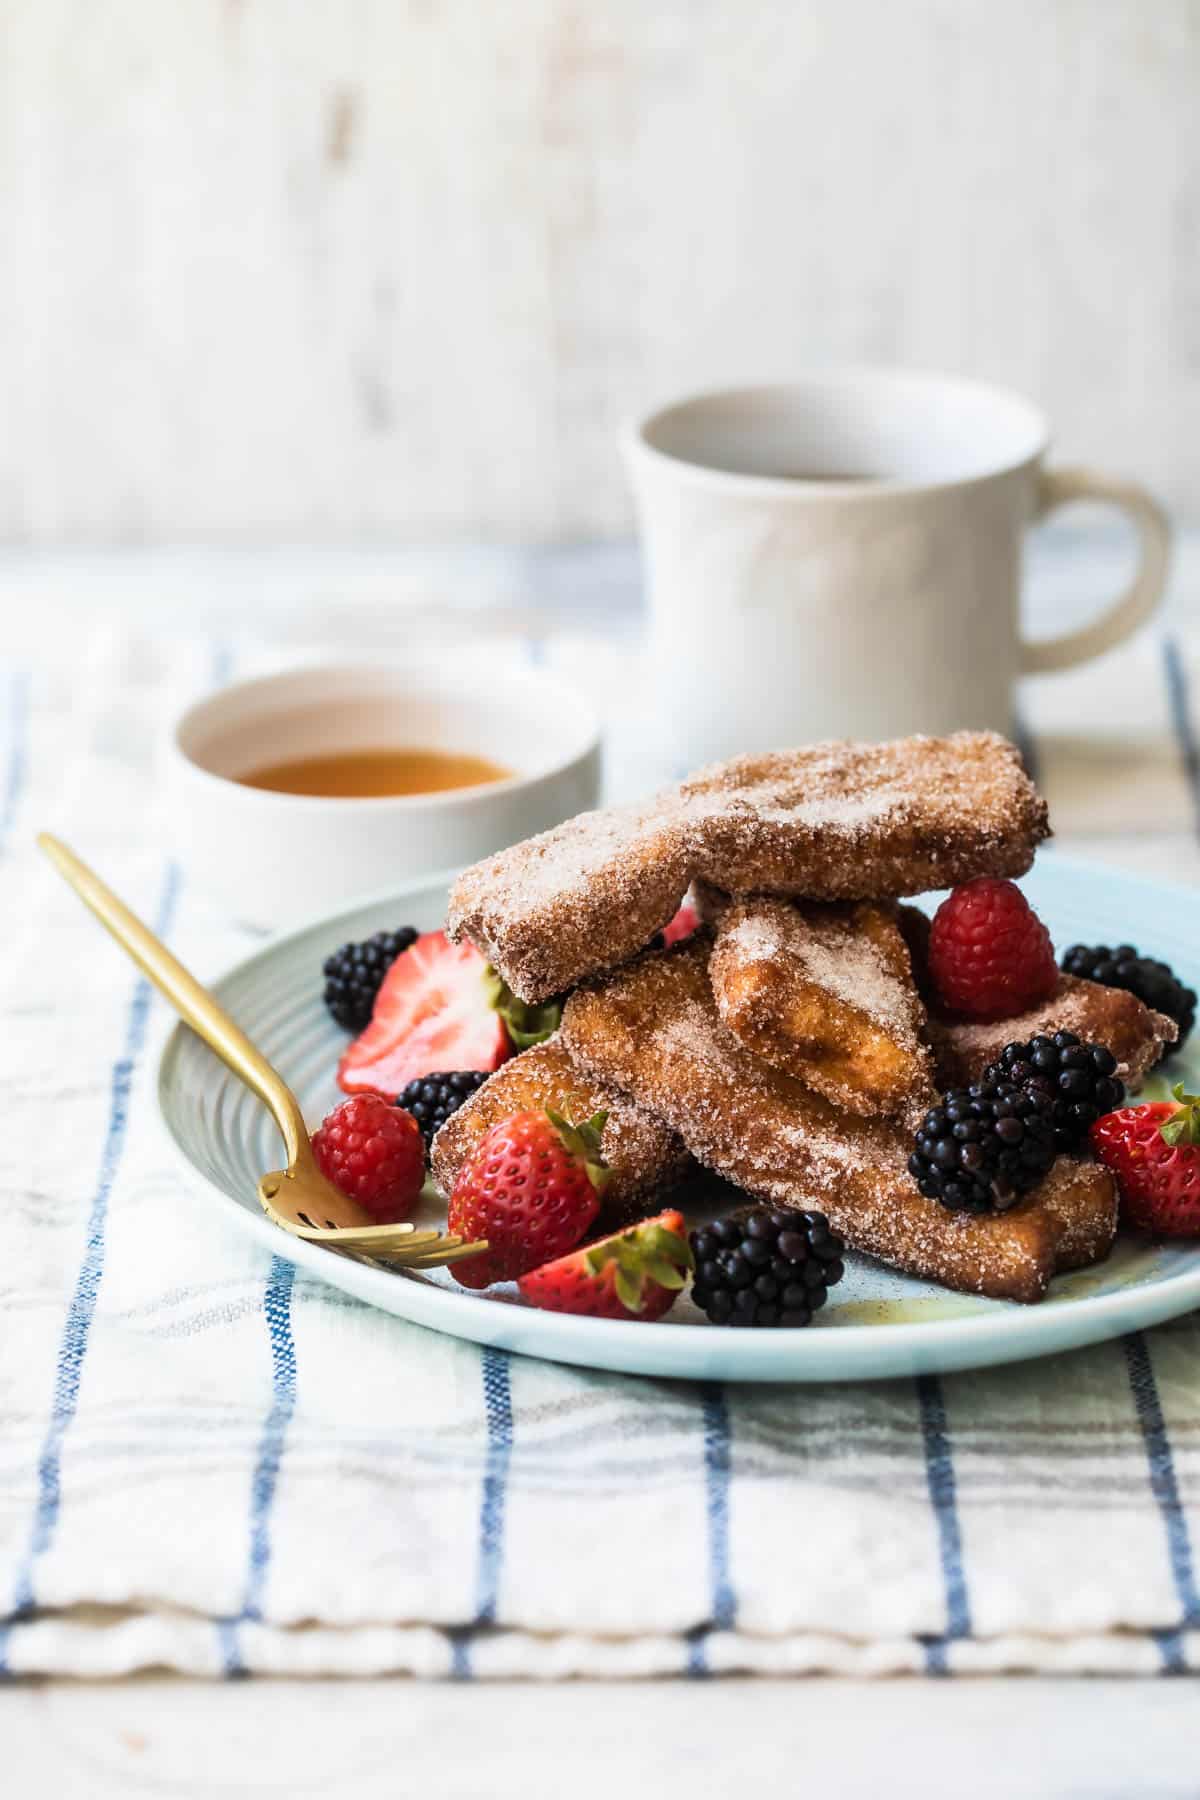 A stack of French toast sticks covered in berries on a plate.